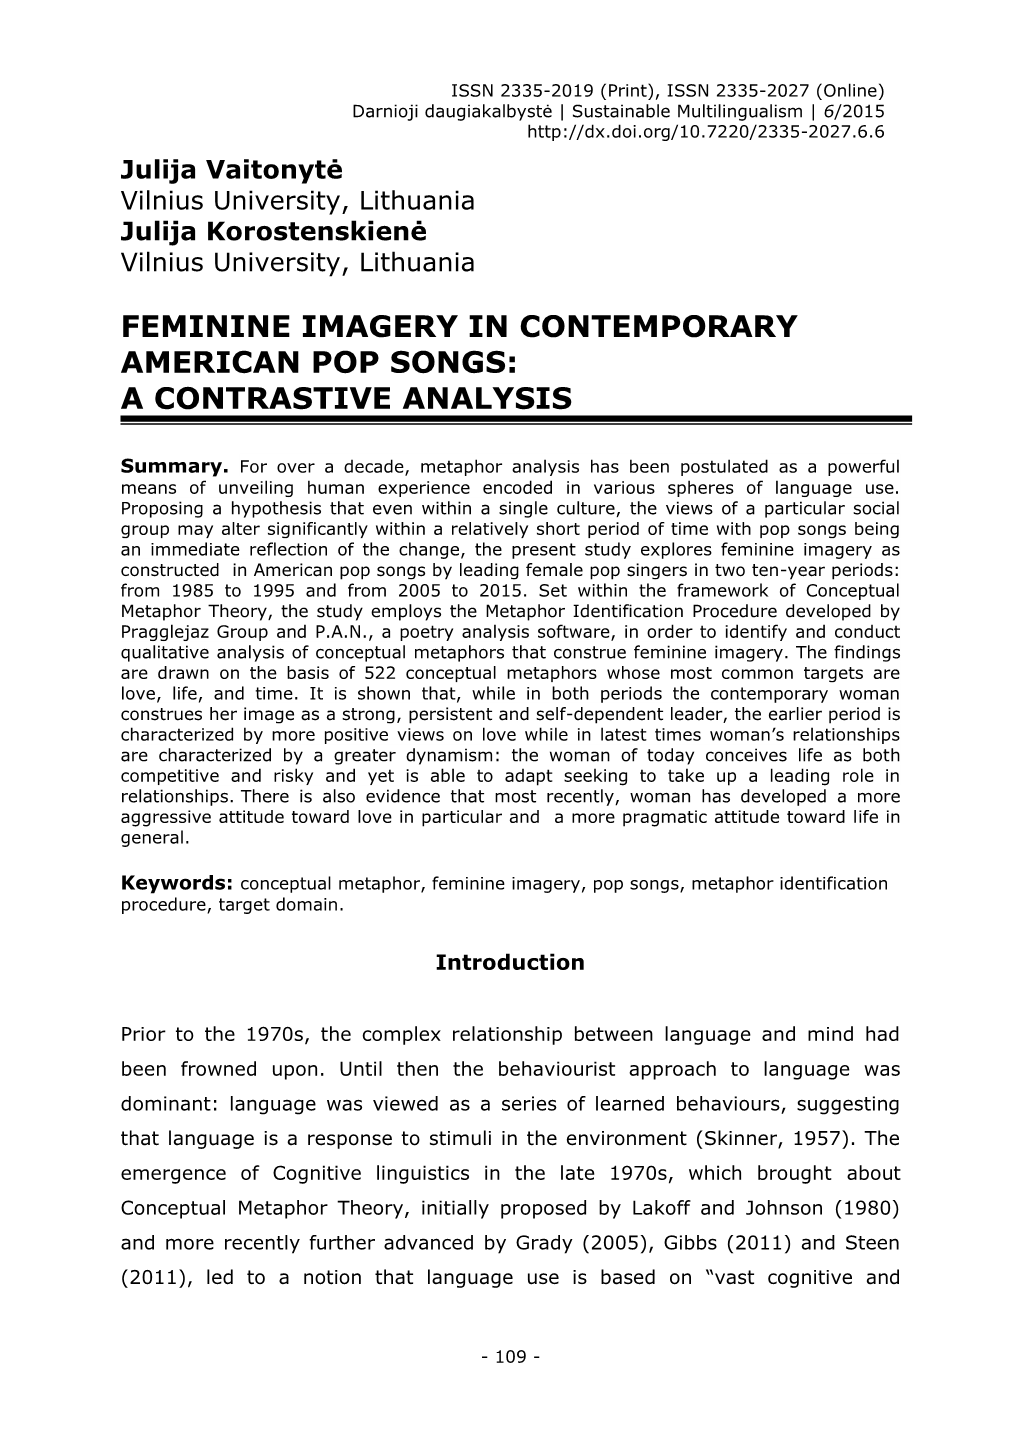 Feminine Imagery in Contemporary American Pop Songs: a Contrastive Analysis